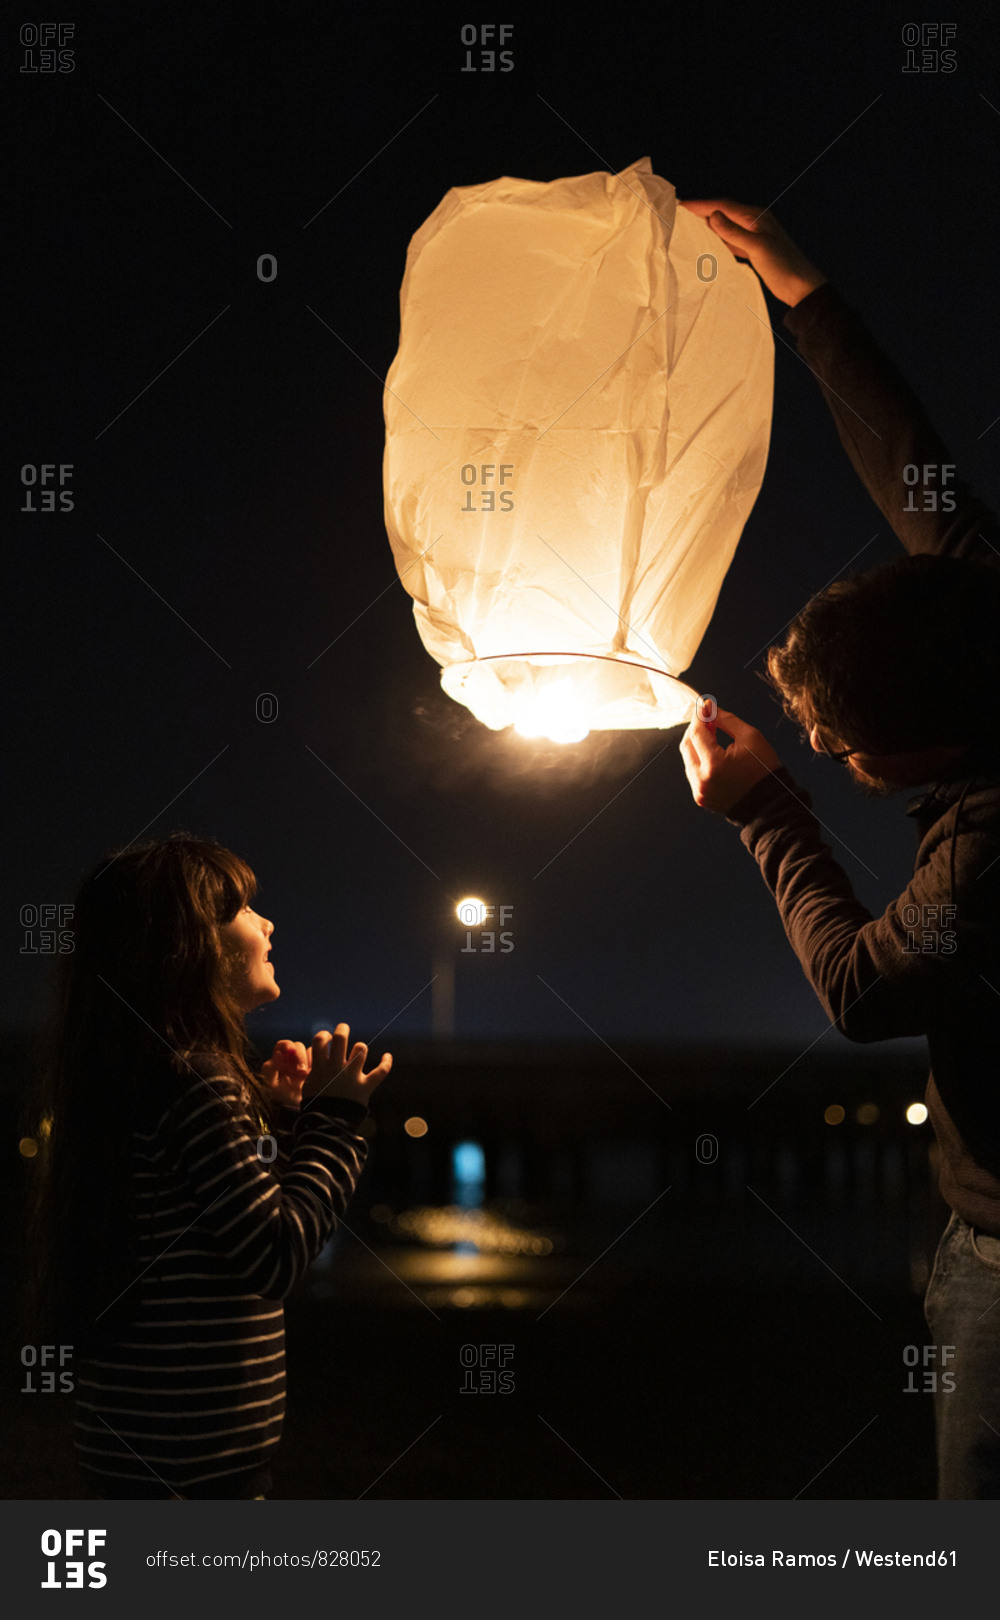 Father and daughter preparing a sky lantern at night